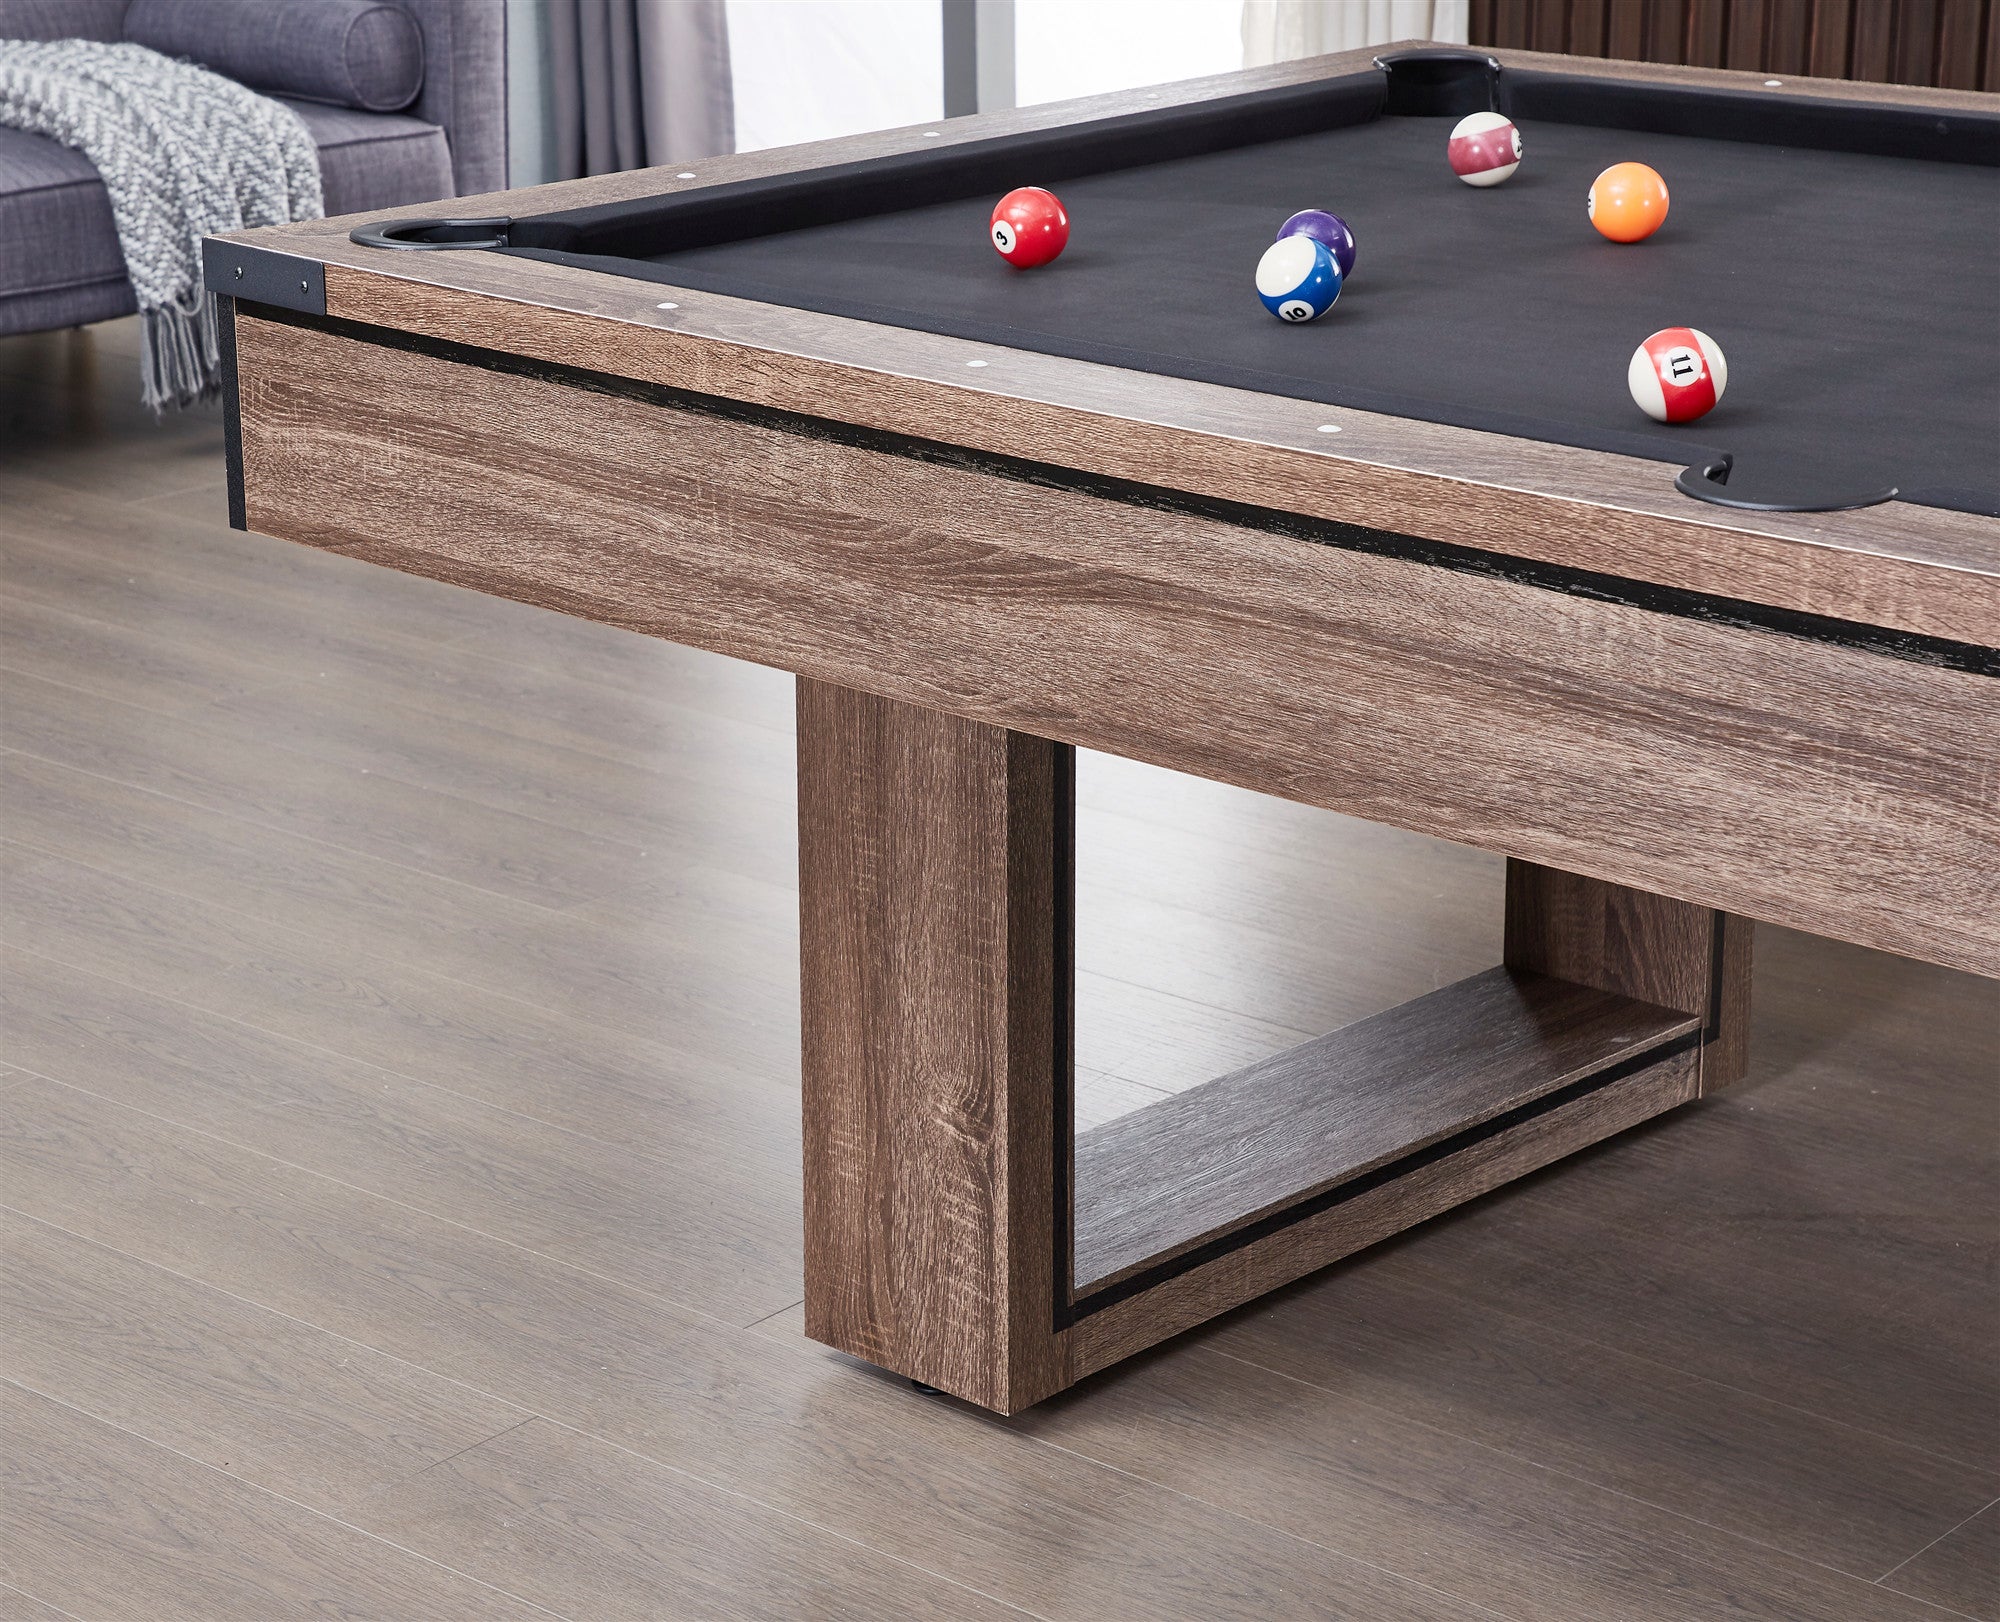 Ocala Dining Pool Table-8FT 3IN1